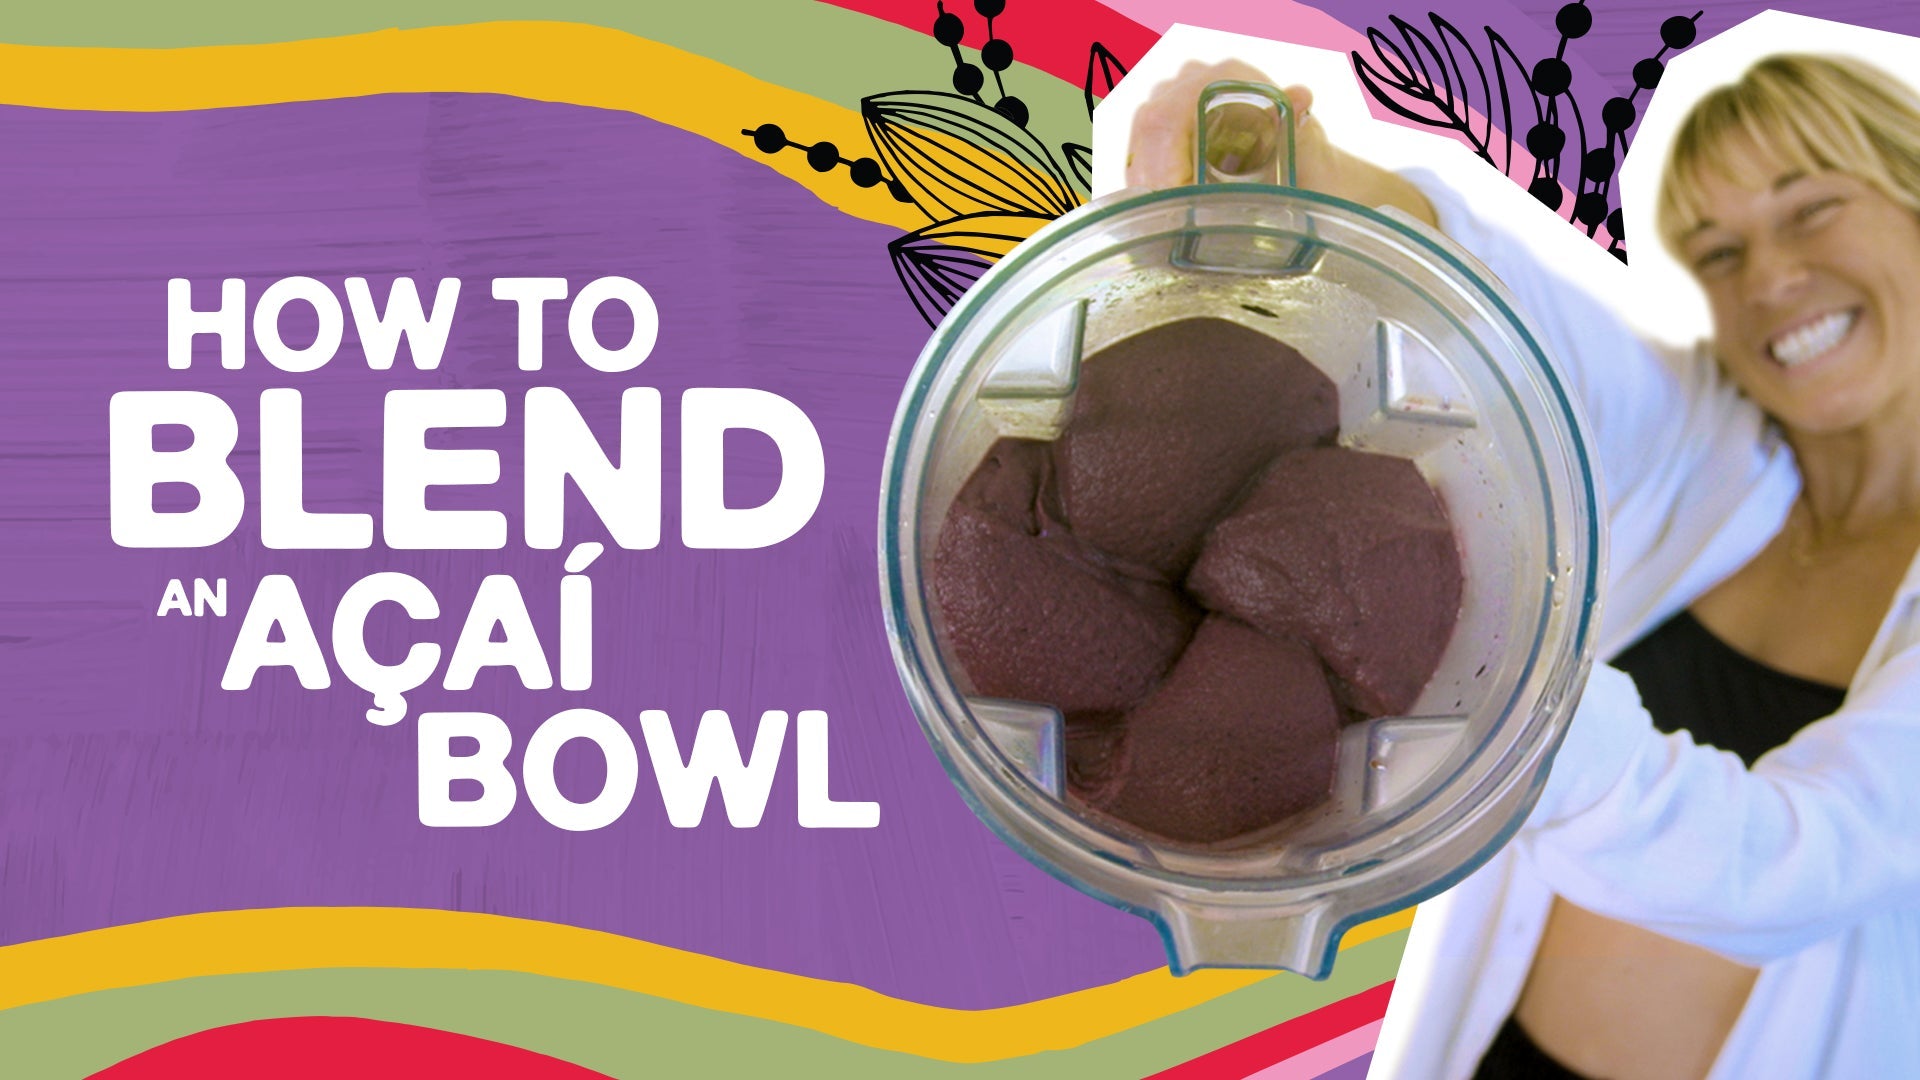 Load video: How to make an acai bowl